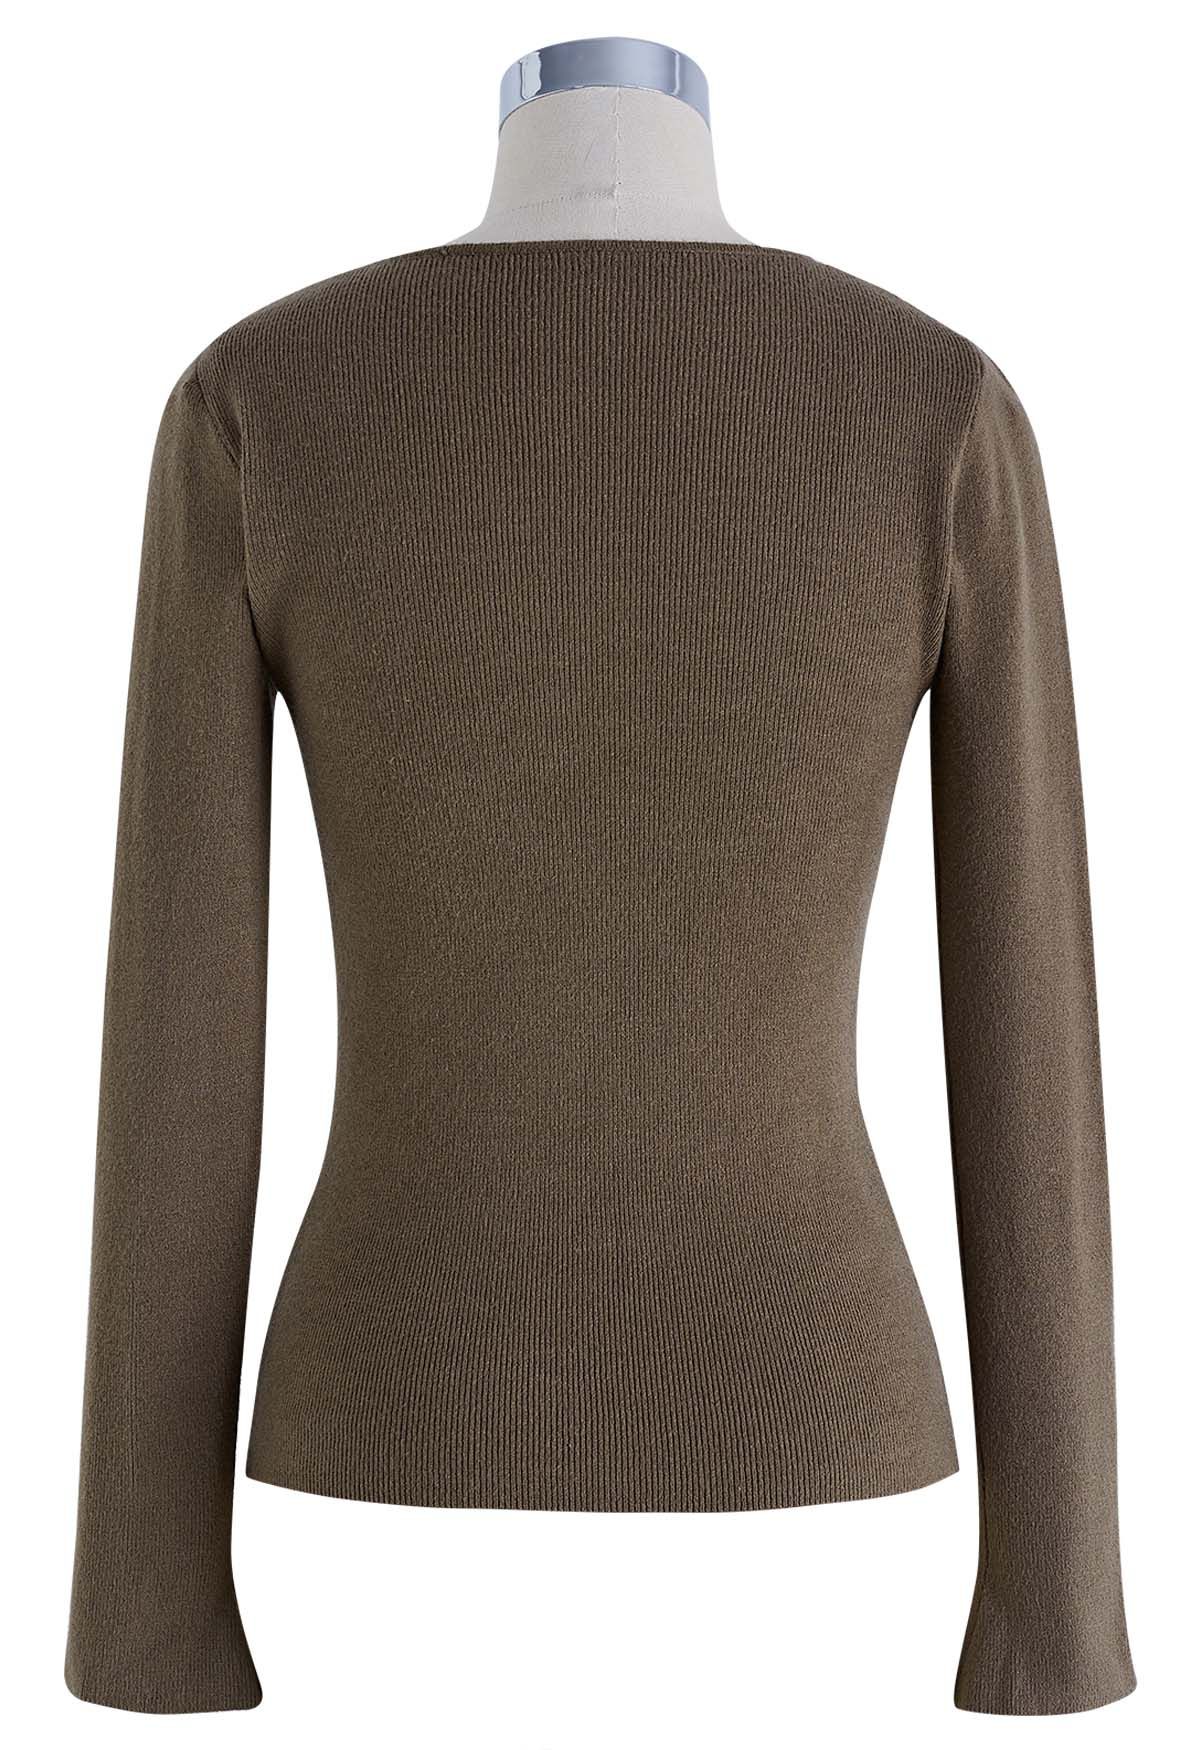 Notch Neckline Fitted Knit Top in Taupe